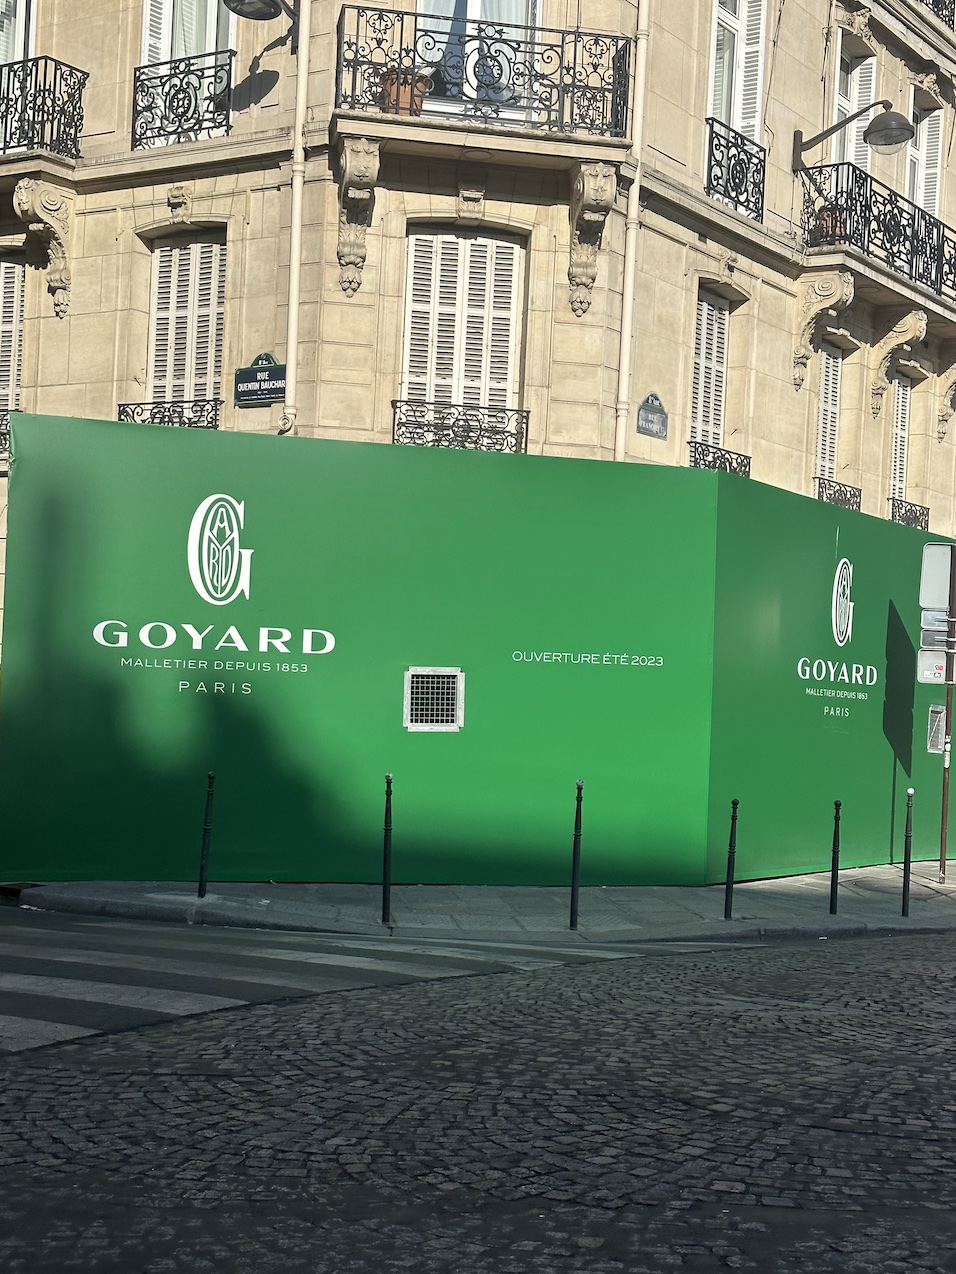 Maison Goyard - To celebrate the opening of its first